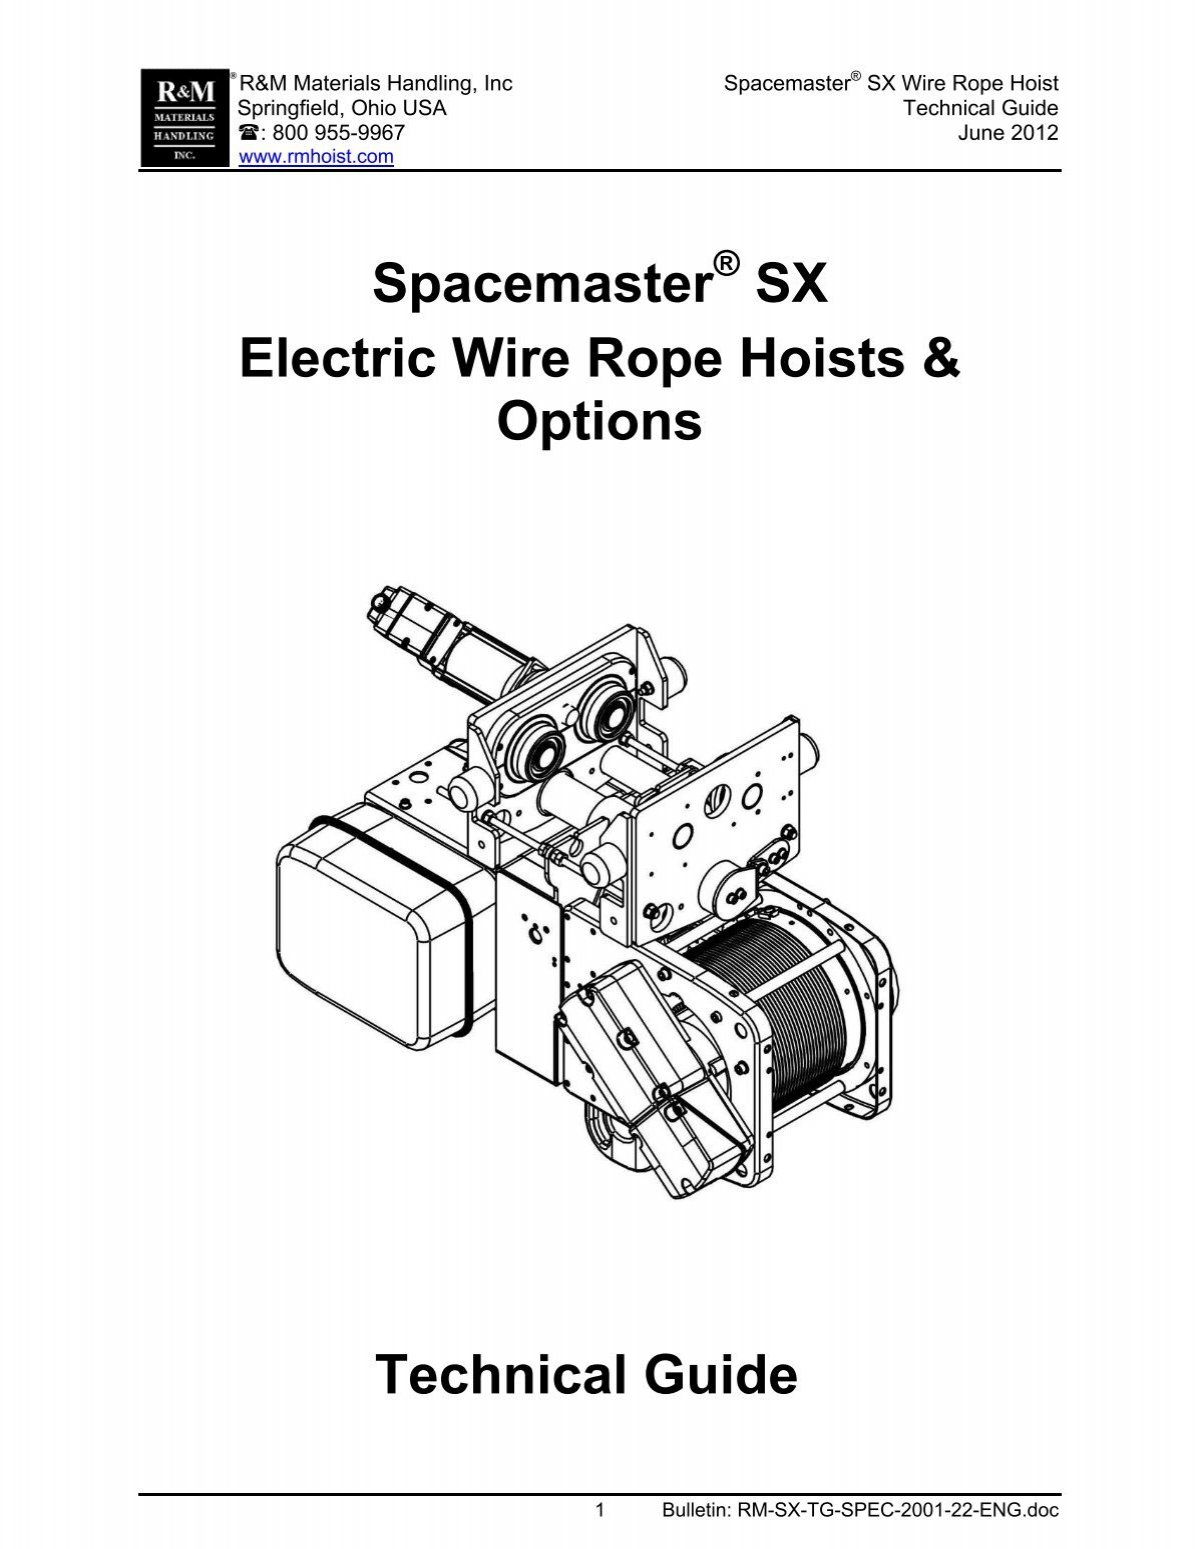 Spacemaster SX Electric Wire Rope Hoists & Options Technical Guide